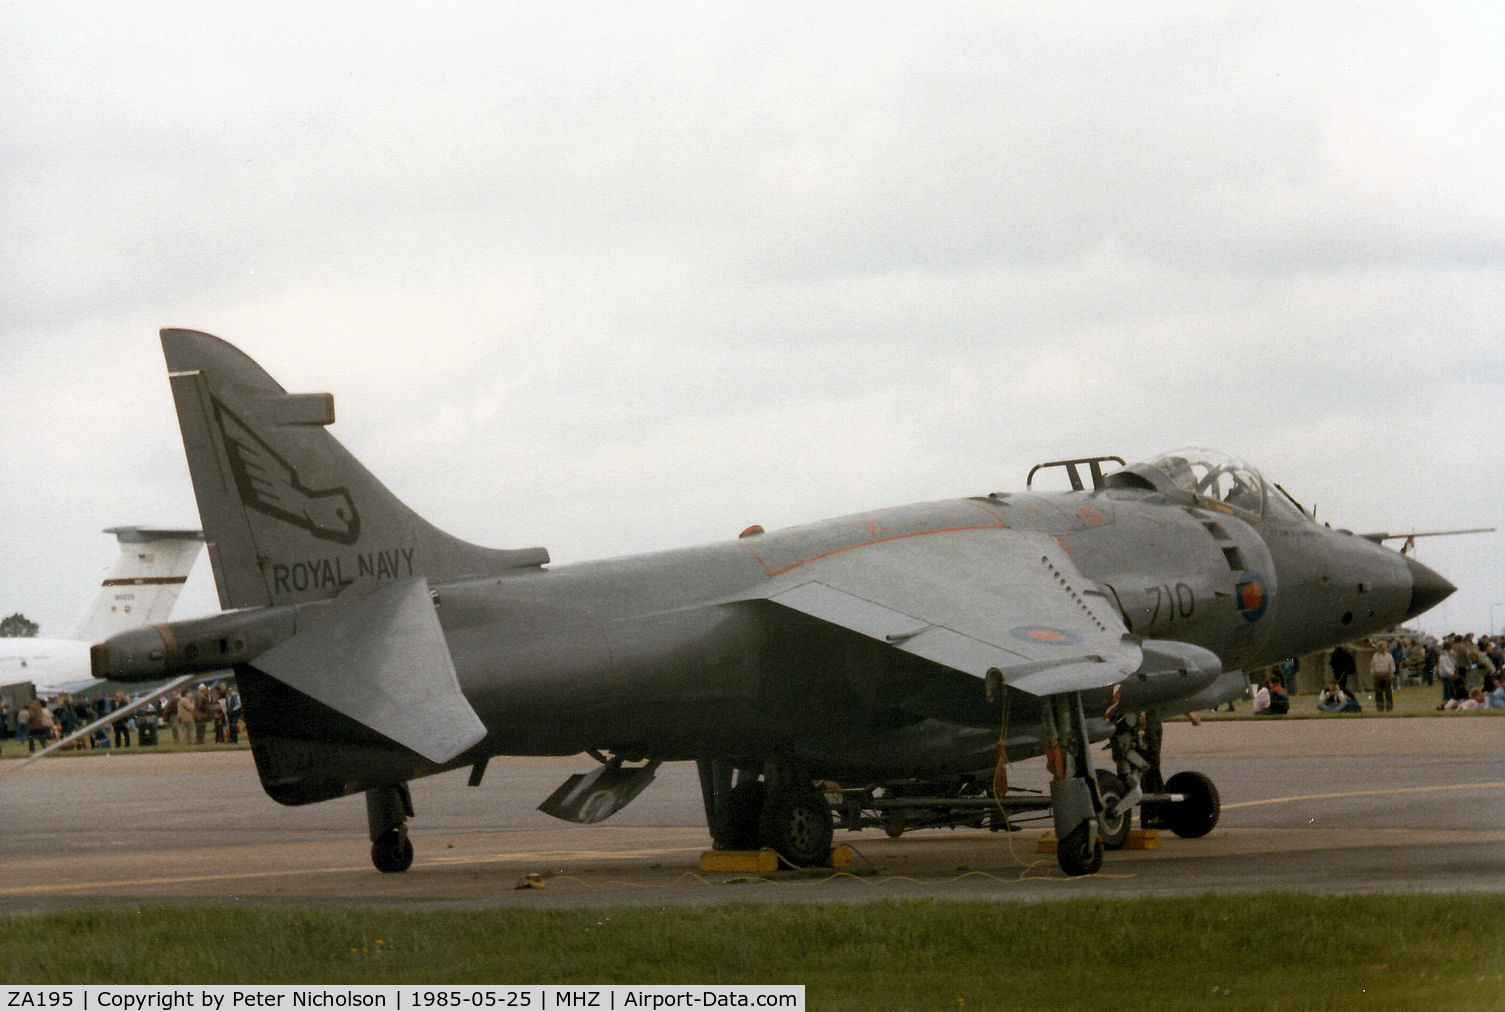 ZA195, 1983 British Aerospace Sea Harrier FRS.1 C/N 41H-912034, Sea Harrier FRS.1 of 899 Squadron at RNAS Yeovilton on display at the 1985 RAF Mildenhall Air Fete.